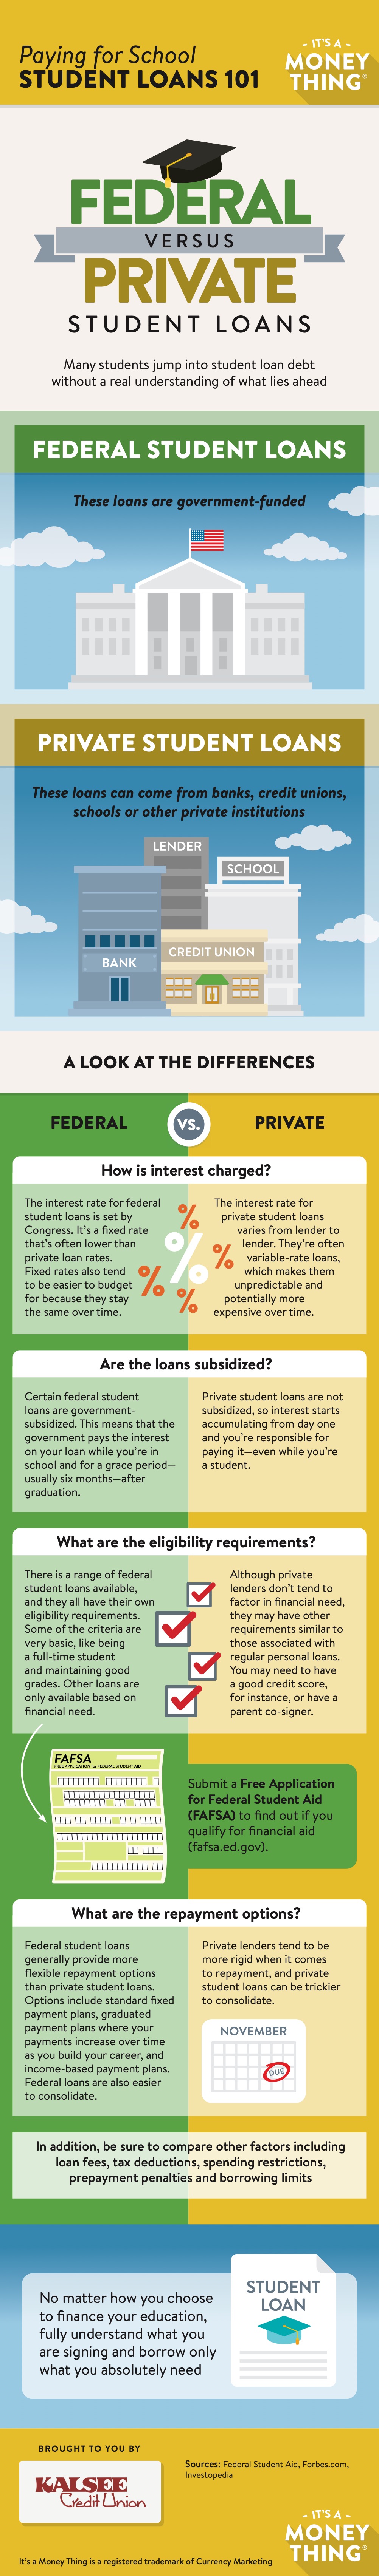 Paying for school student loans 101 infographic, click for transcription